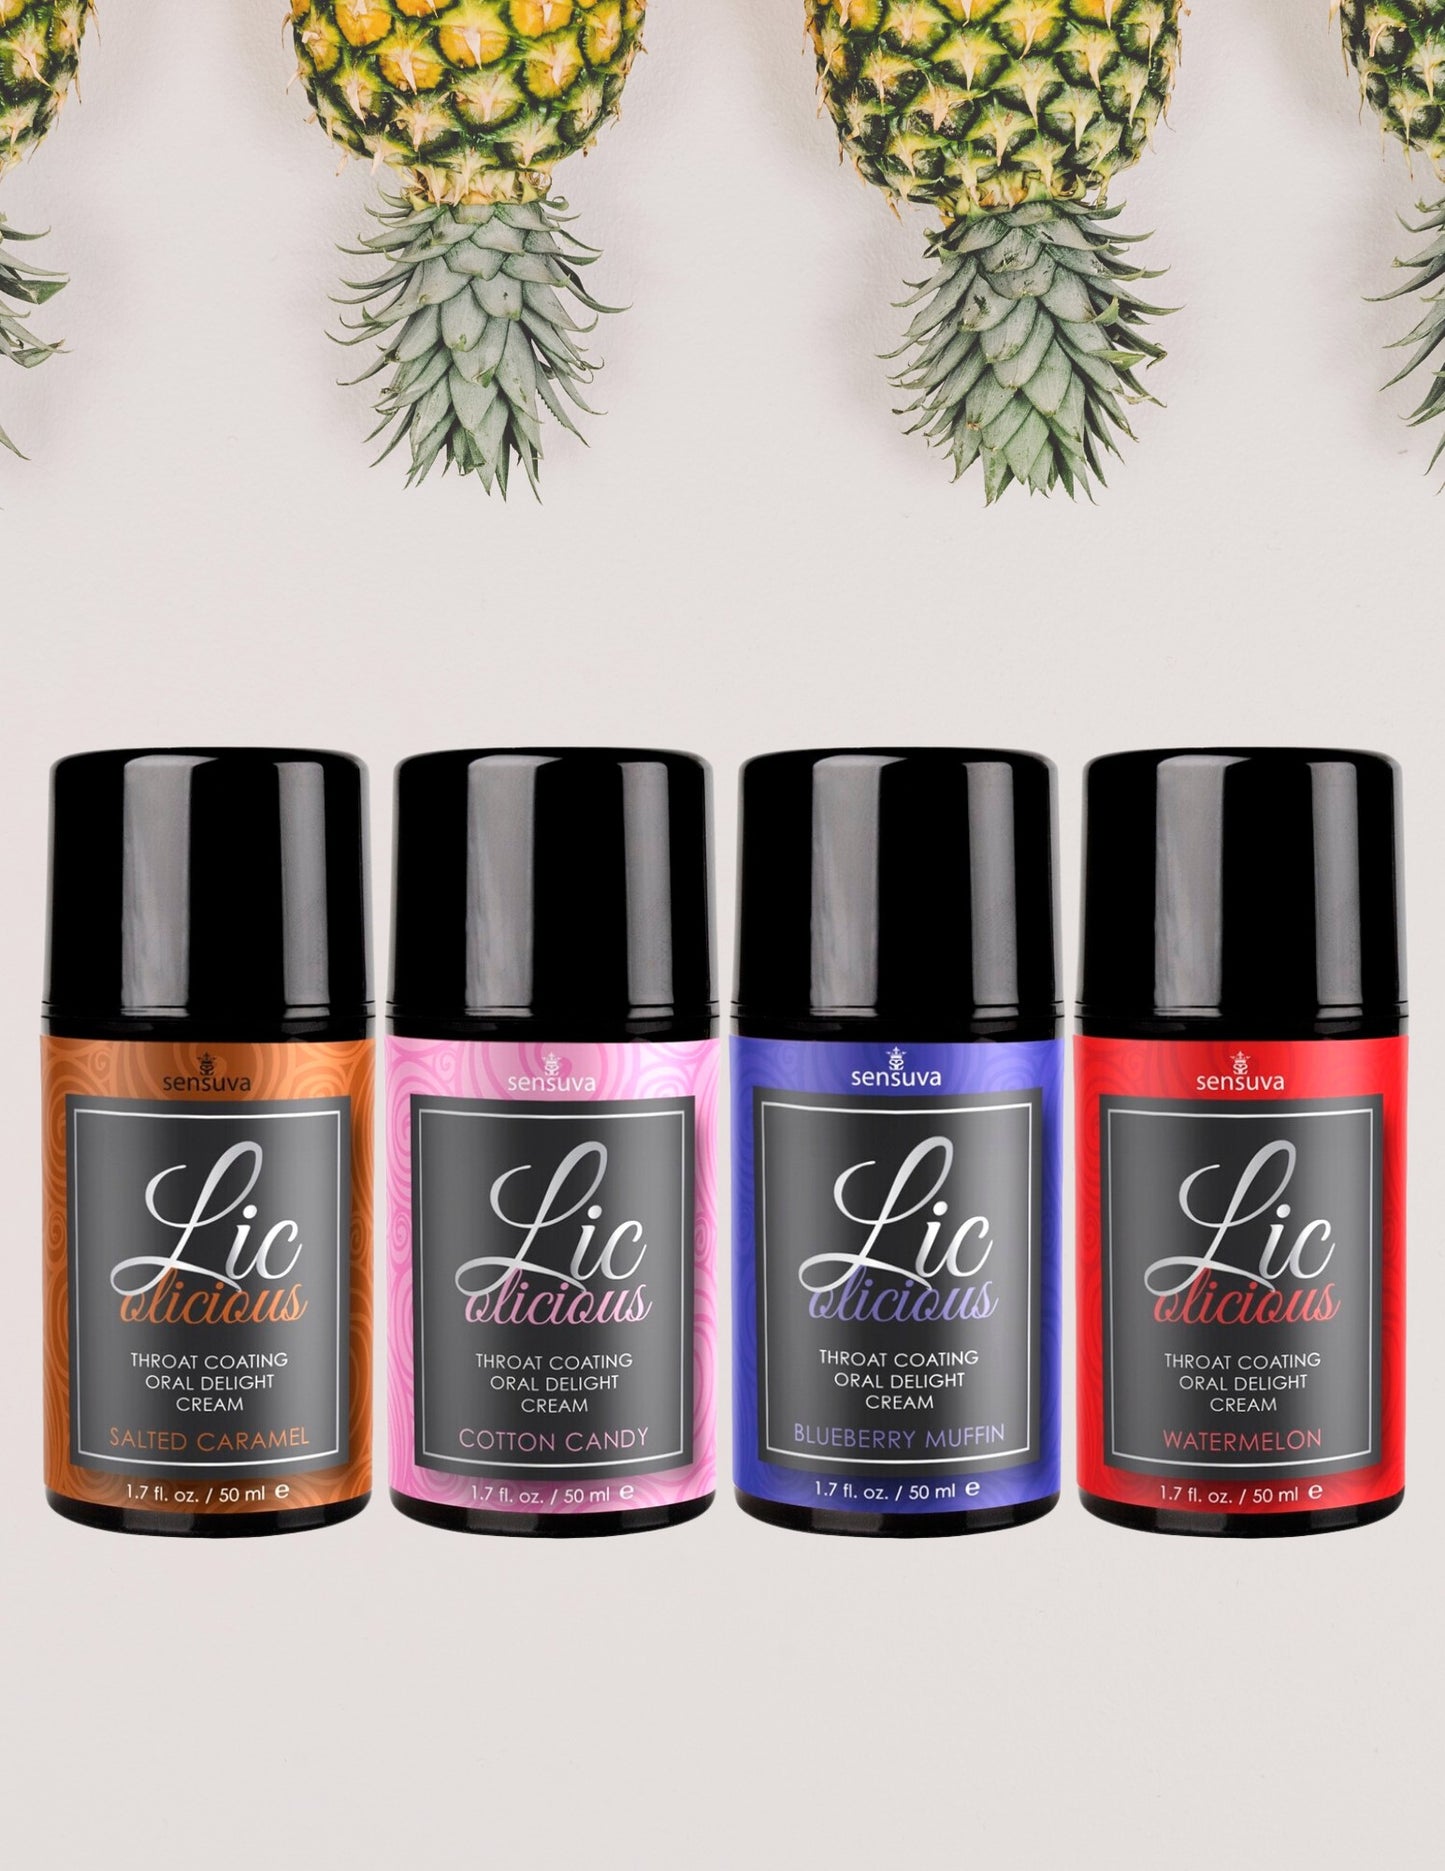 Ad showing the 4 flavors of Licolicious from Sensuva.